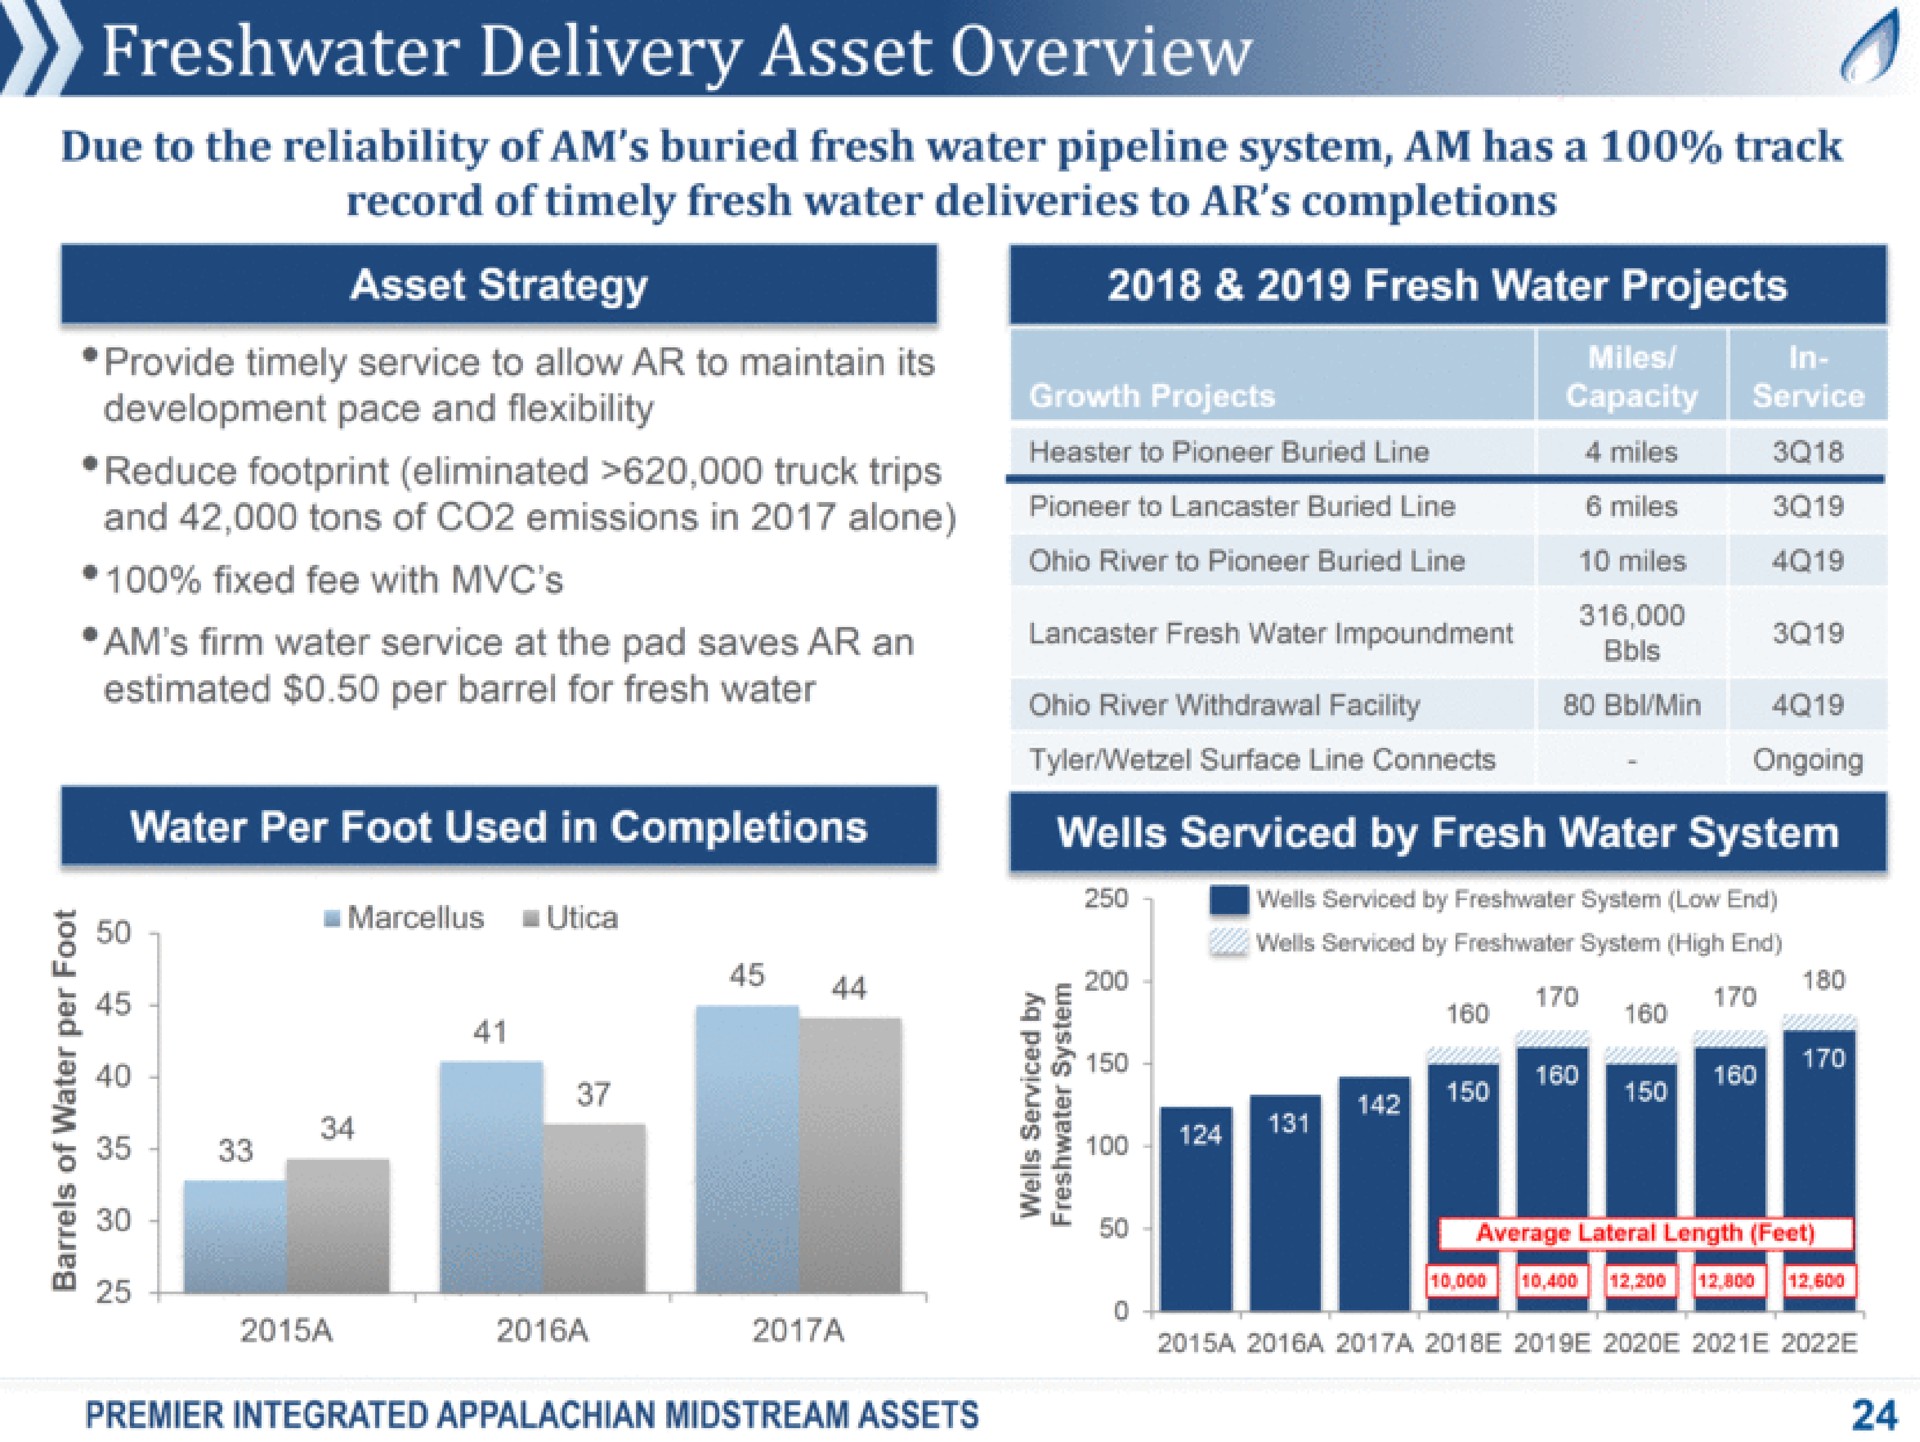 delivery asset overview due to the reliability of am buried fresh water pipeline system am has a track record of timely fresh water deliveries to completions past merle provide timely service to allow to maintain its development pace and flexibility reduce footprint eliminated truck tips and tons of emissions in alone fixed fee with am firm water service at the pad saves an estimated per barrel for fresh water water per foot used in completions fresh water projects to miles to buried line river to pioneer buried line fresh water impoundment river withdrawal facility miles miles min surface line connects ongoing wells serviced by fresh water system wells by system low end a a a at a a wells serviced by system high end average lateral length feet a a a a a a premier integrated midstream assets | Antero Midstream Partners